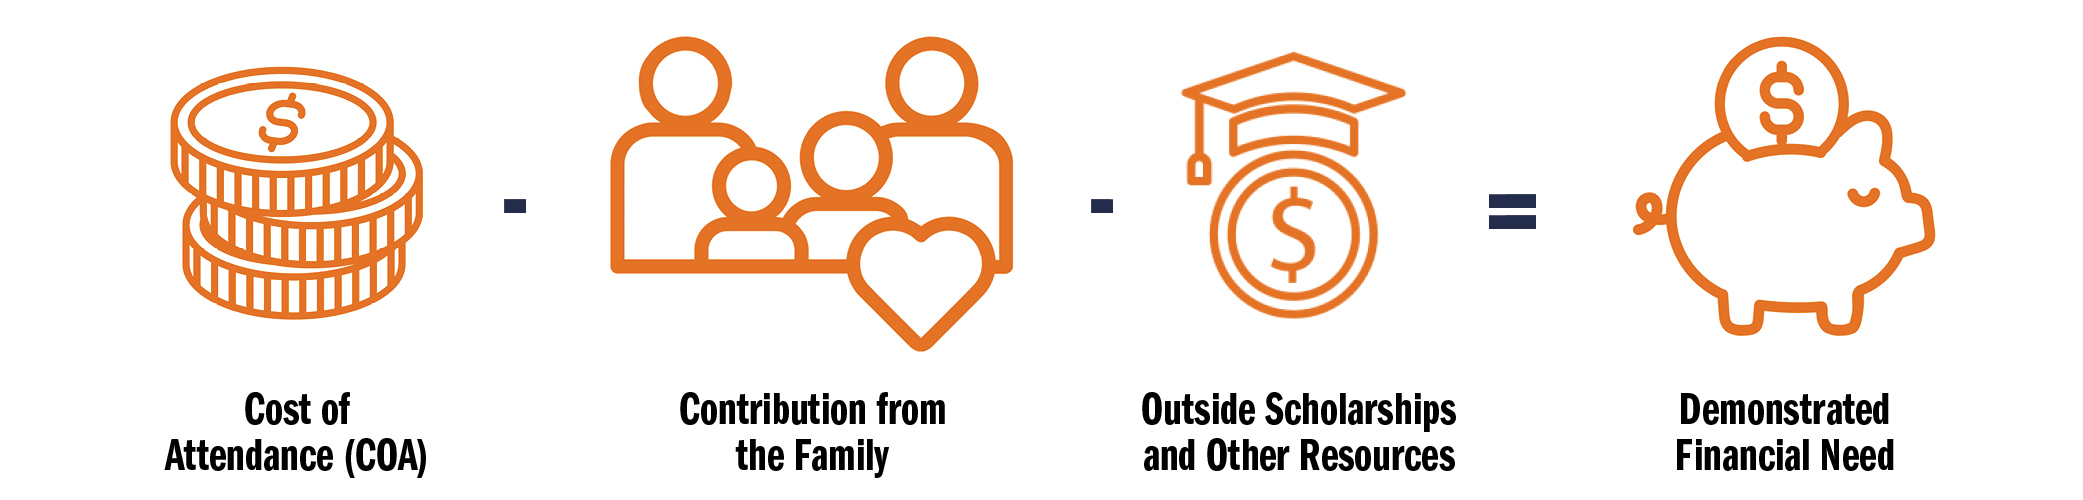 Cost of Attendance - Contribution from the Family - Scholarships = Demonstrated Financial Need